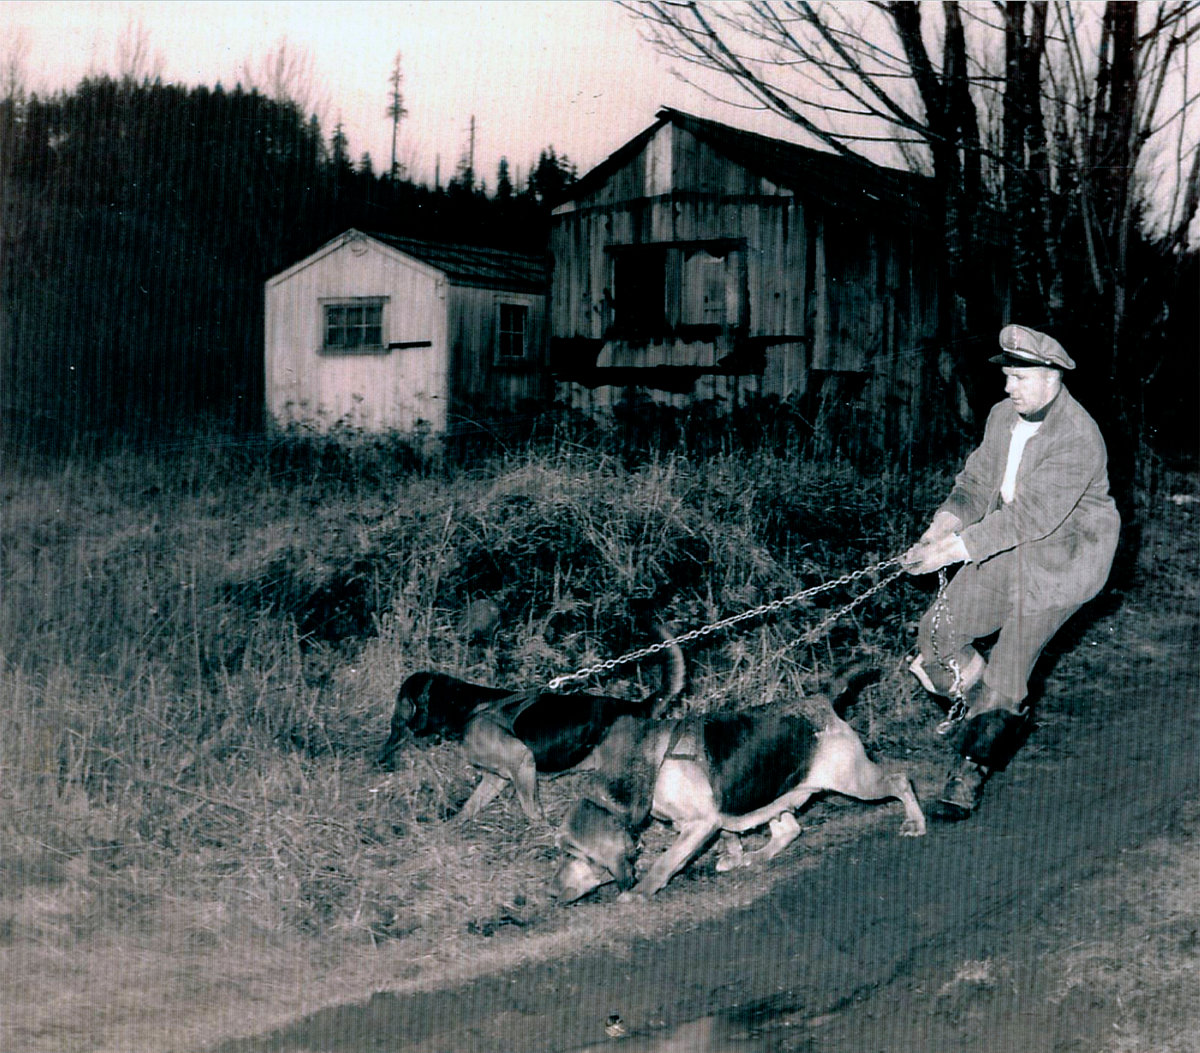 Chief Deputy Bill Wiester Sr. tracks with his bloodhounds in this 1963 photo.